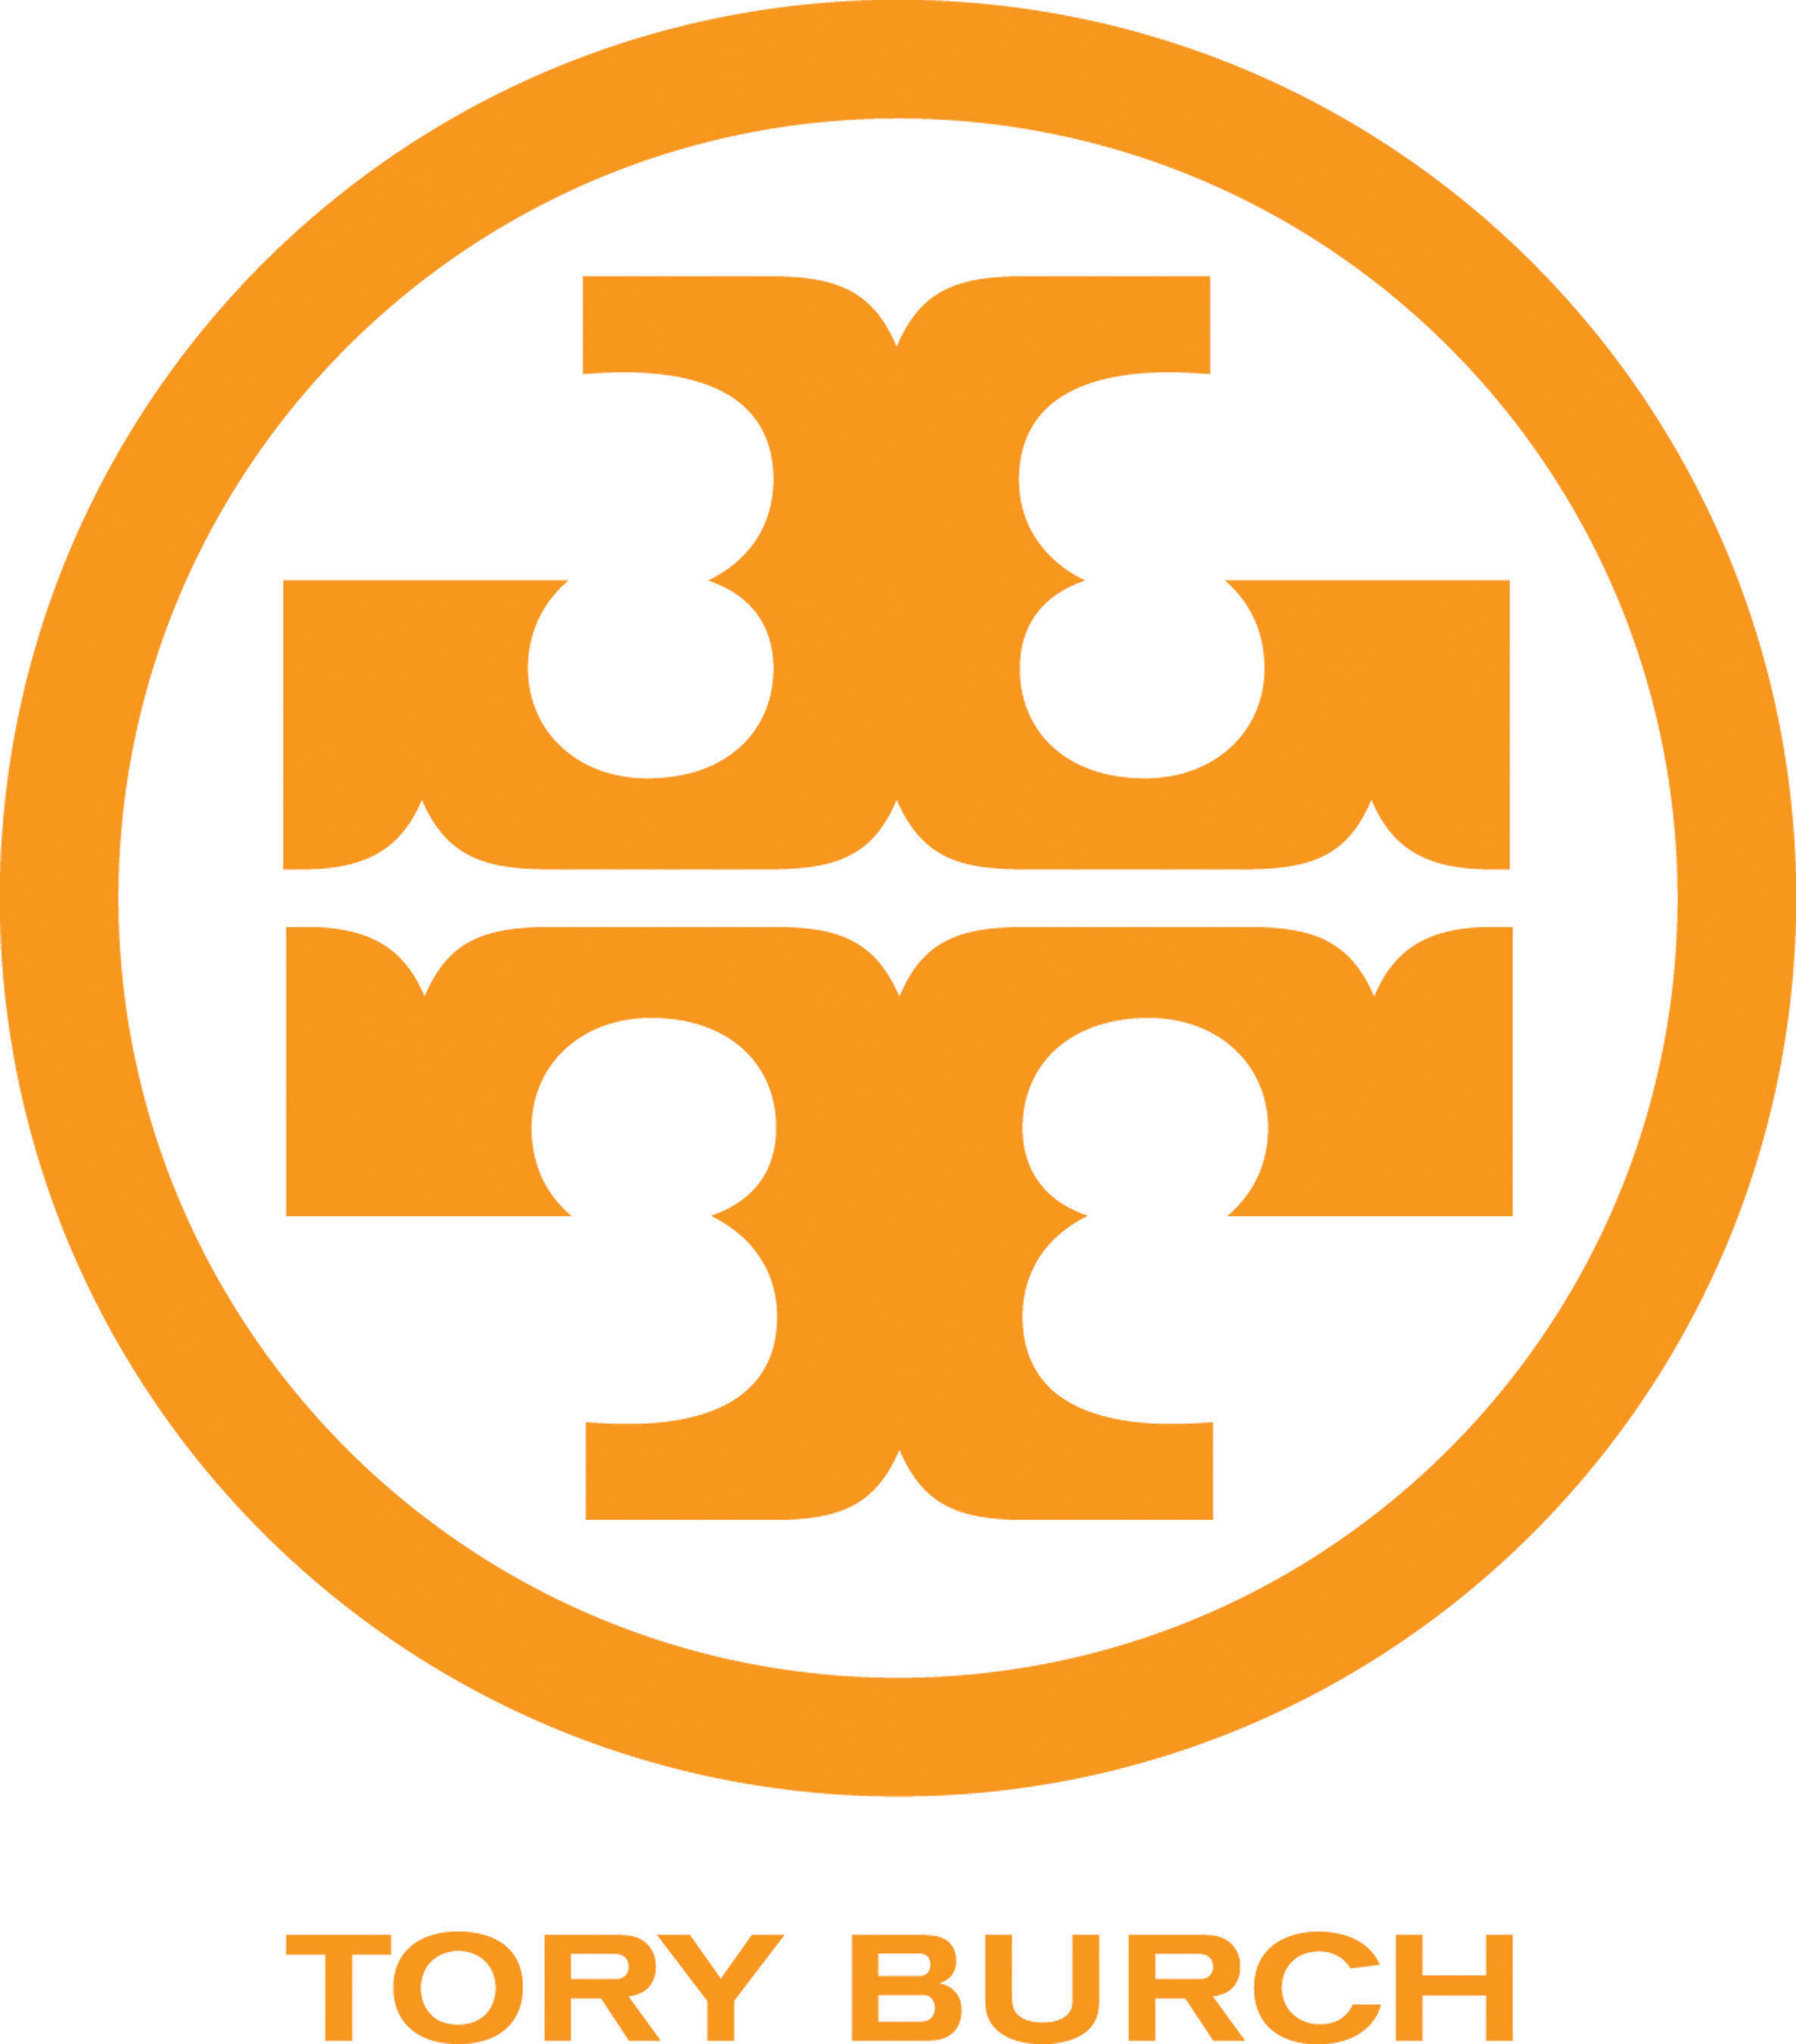 Tory Burch Awarded $164 Million Judgment Against Internet Counterfeiters